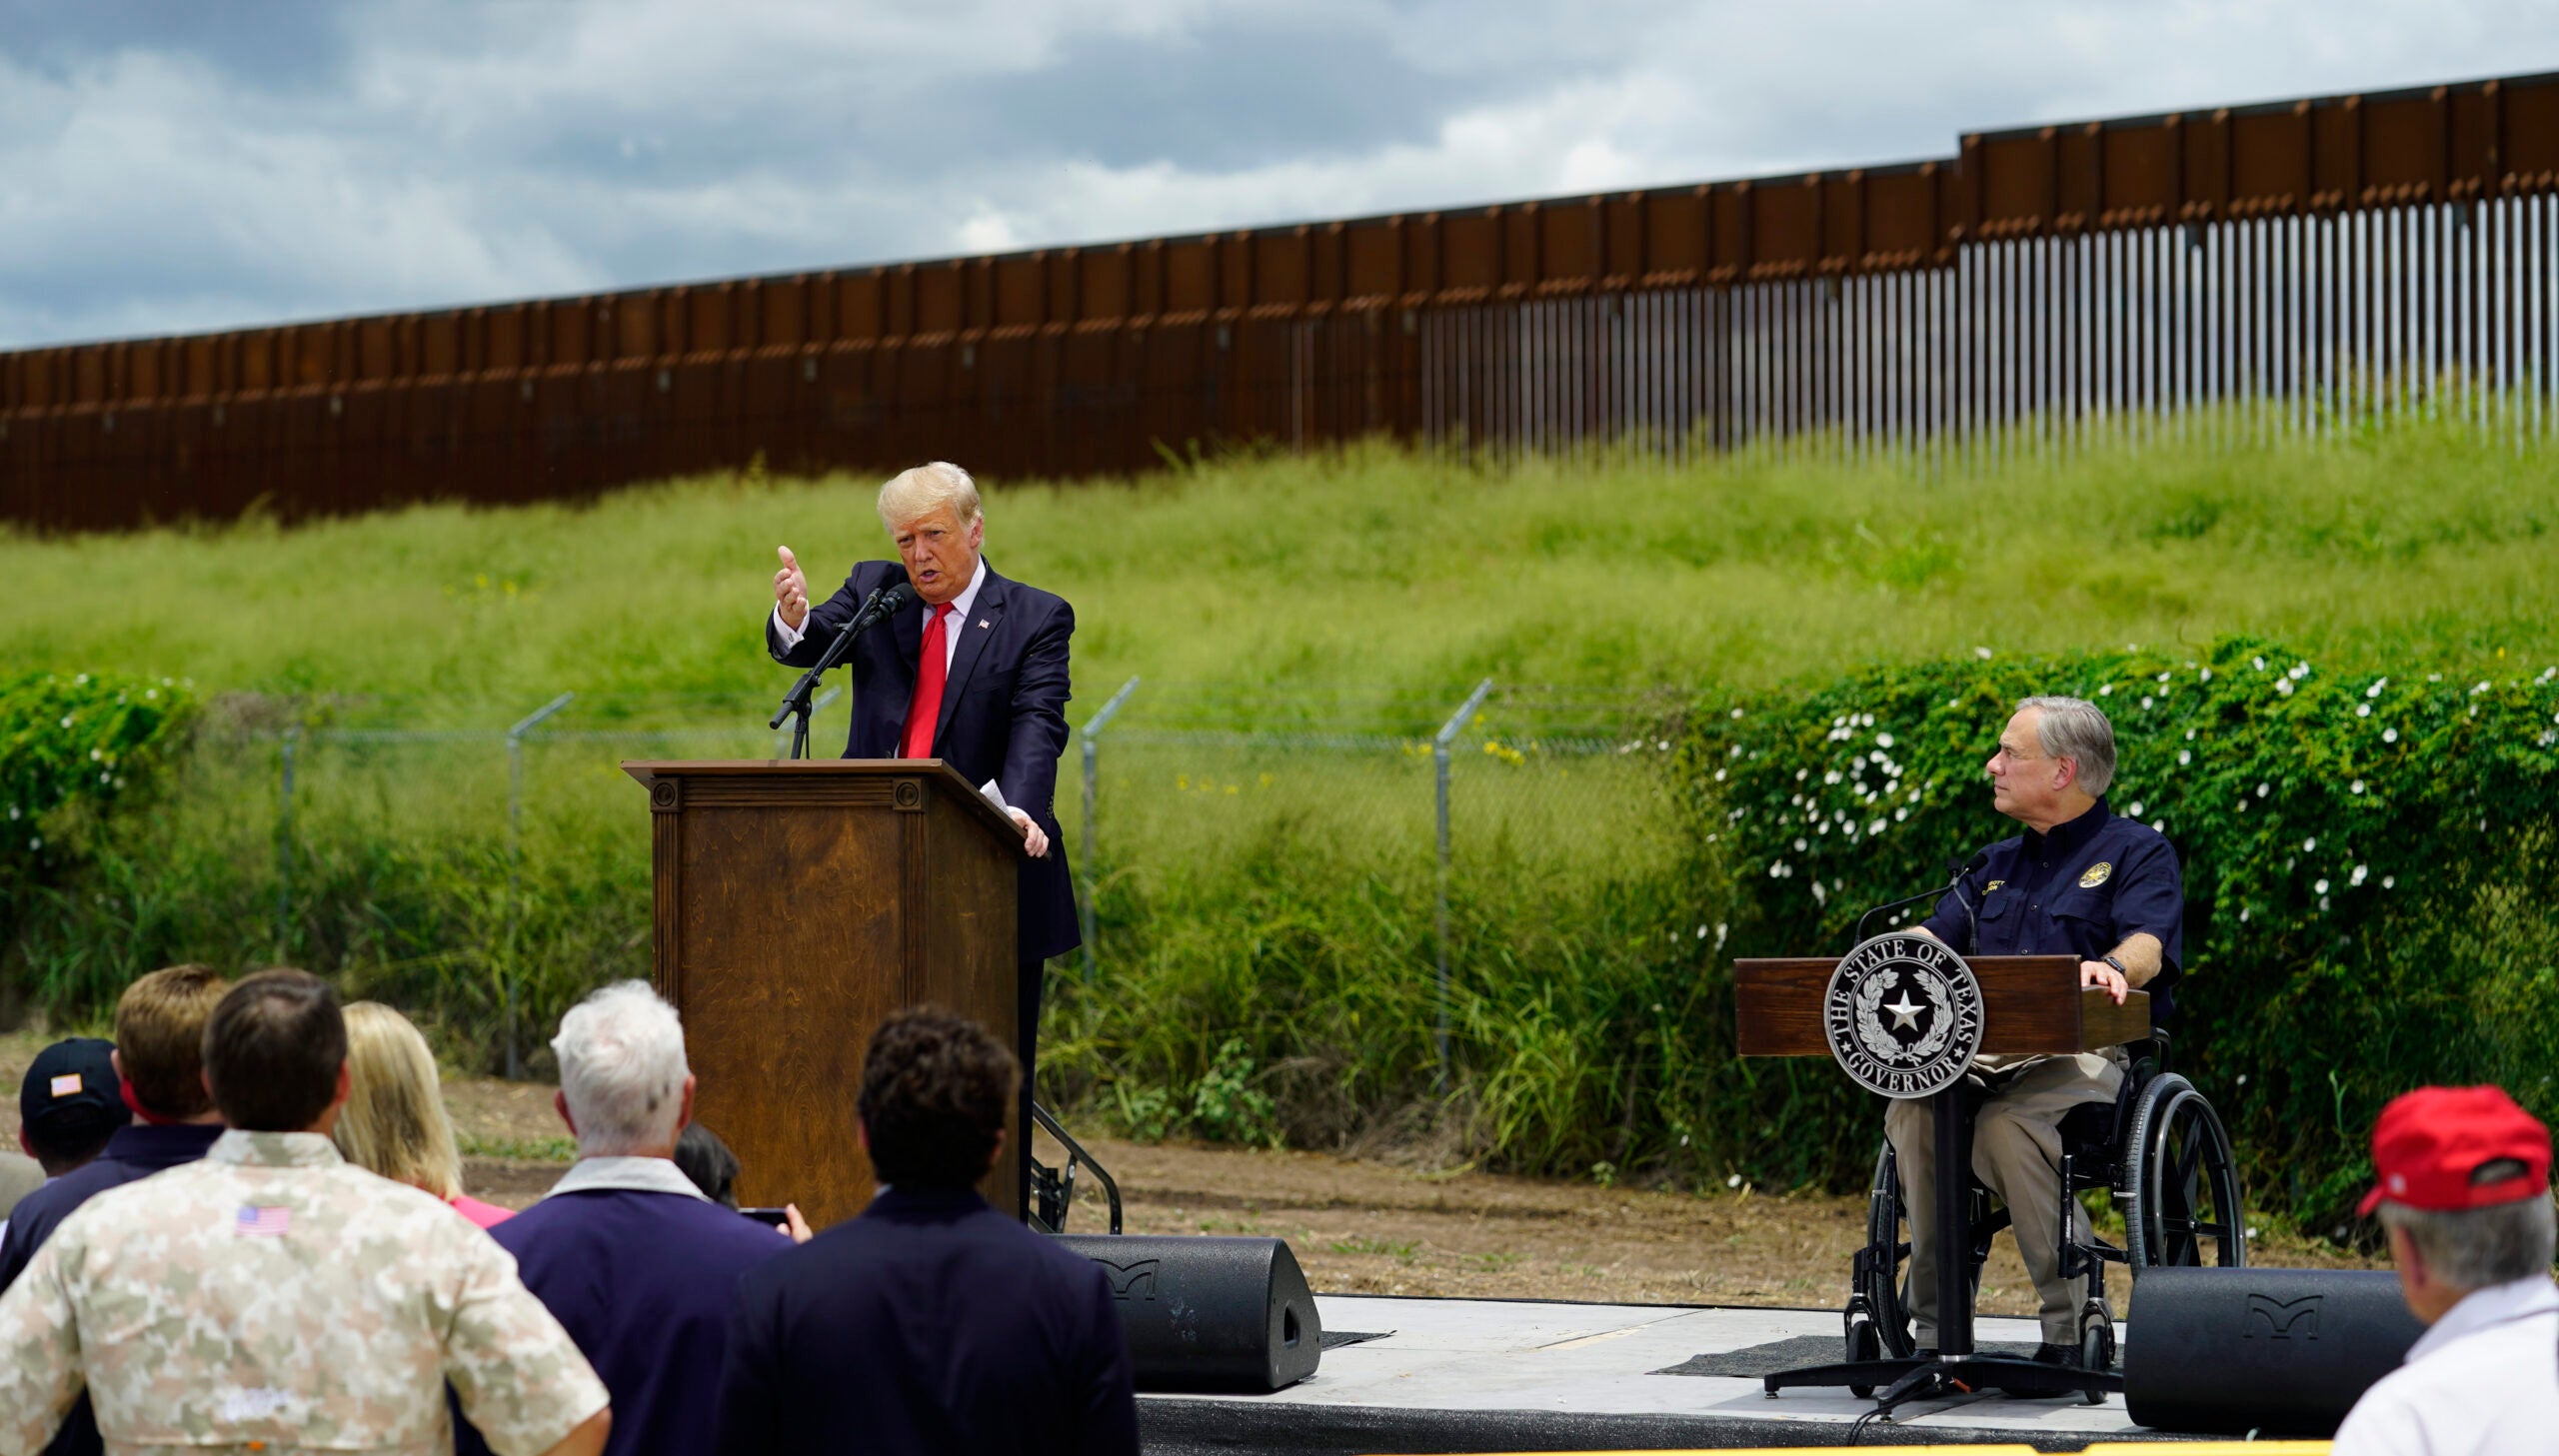 Texas Gov. Greg Abbott, right, listens to Former President Donald Trump, left, during a visit to an unfinished section of border wall, in Pharr, Texas.